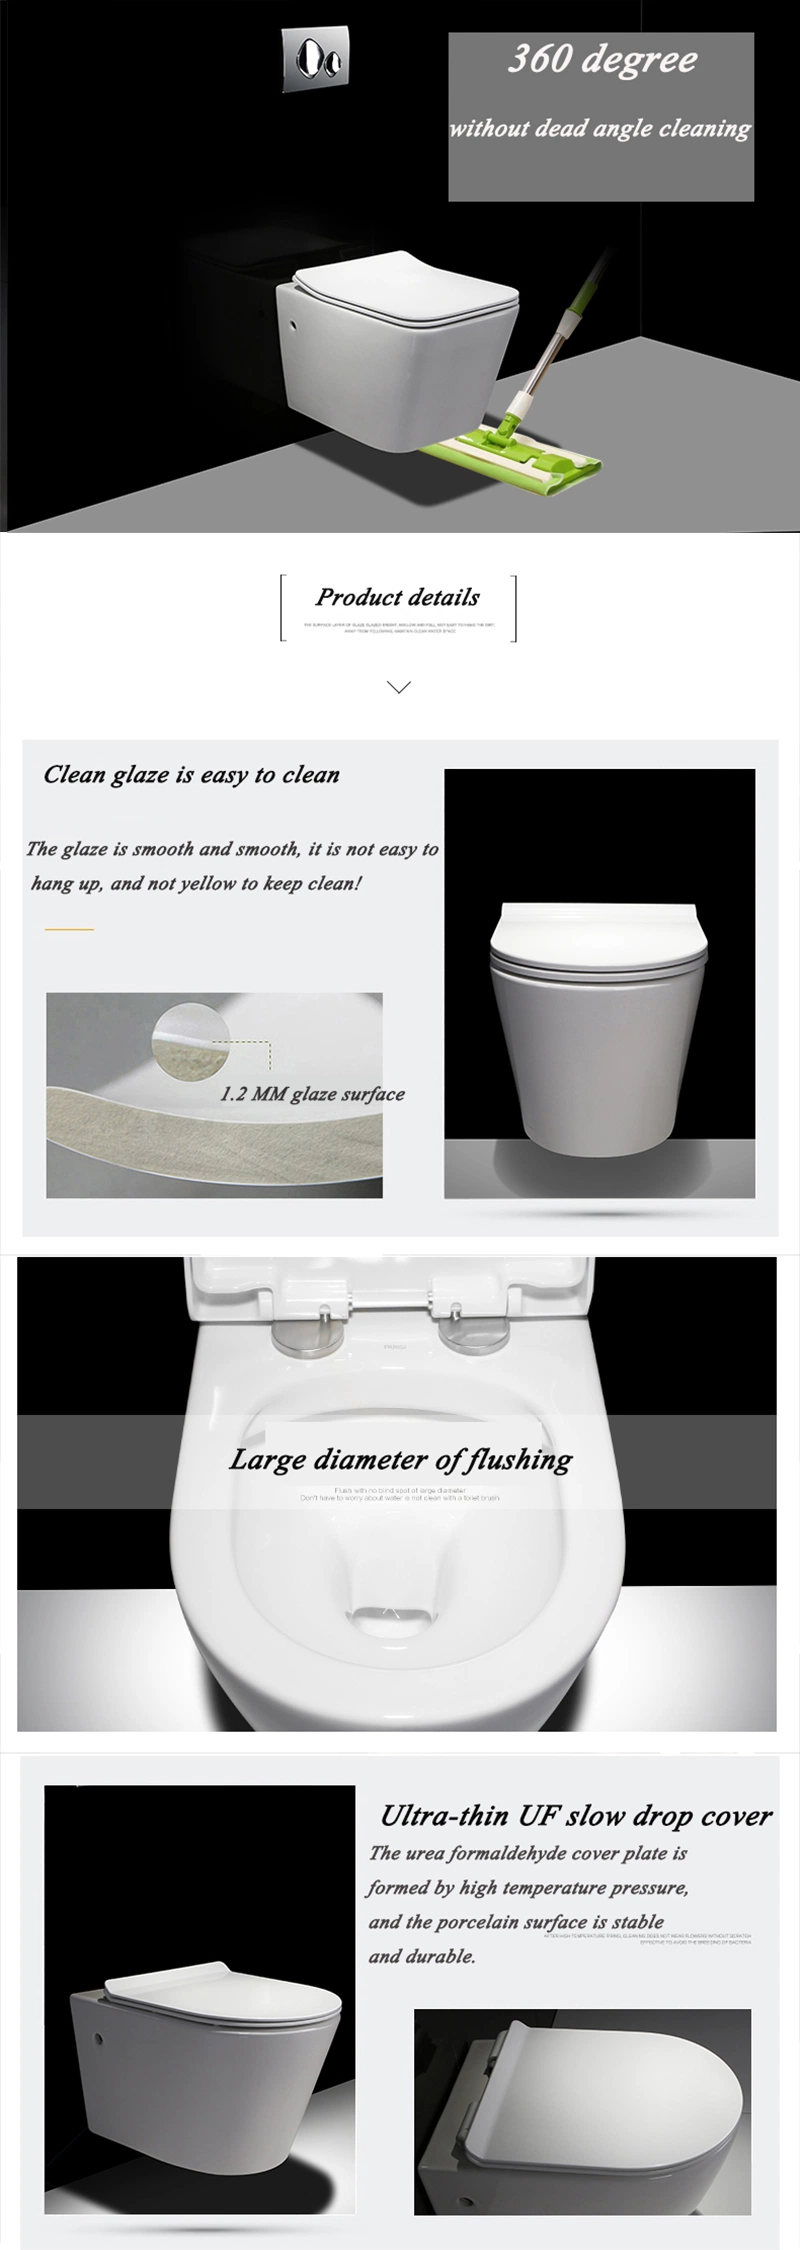 Guangdong Bathroom Factory Price Concealed Flush Tank Floor Mounted Easy Clean Glazed Toilet (BC-2380)